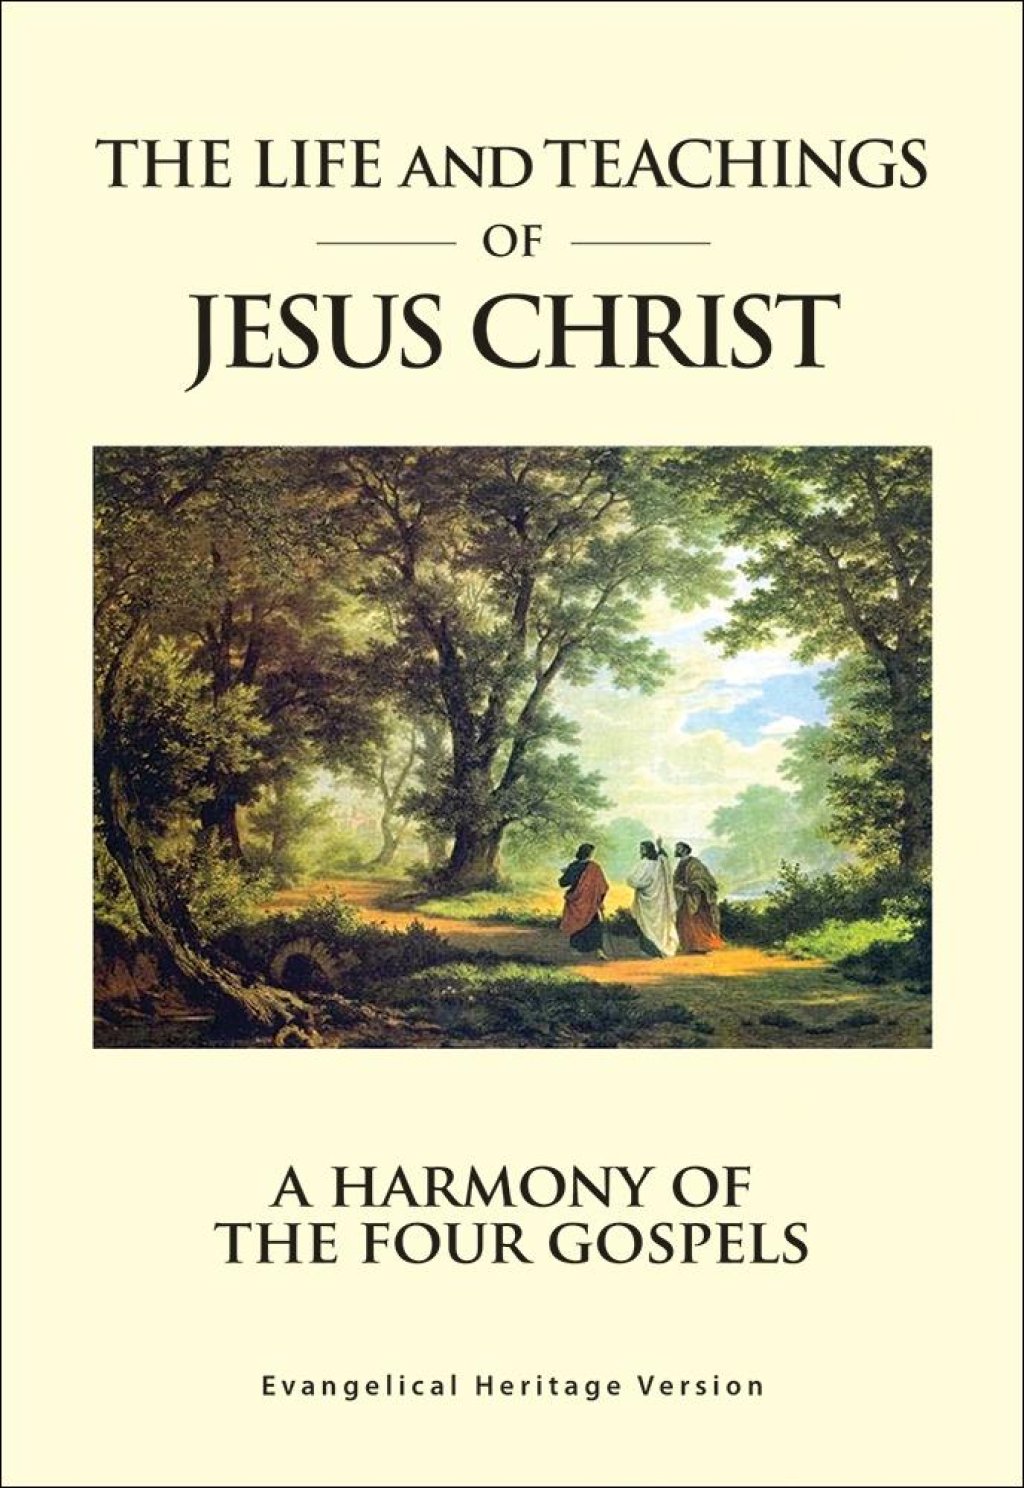 The Life and Teachings of Jesus Christ - A Harmony of the Four Gospels.